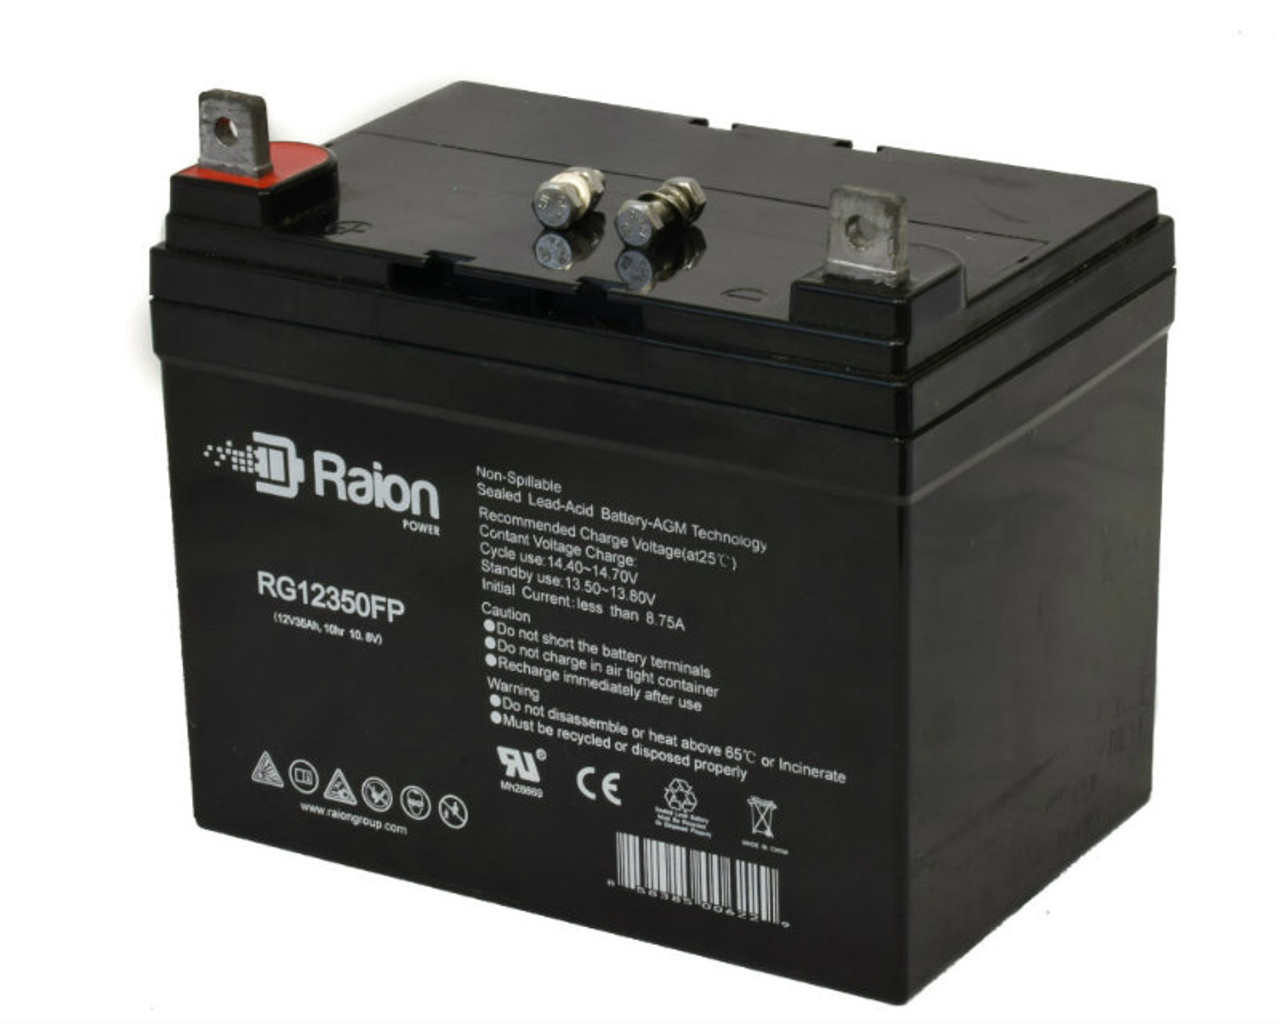 Raion Power Replacement 12V 35Ah RG12350FP Battery for Chiway SM12V36Ah